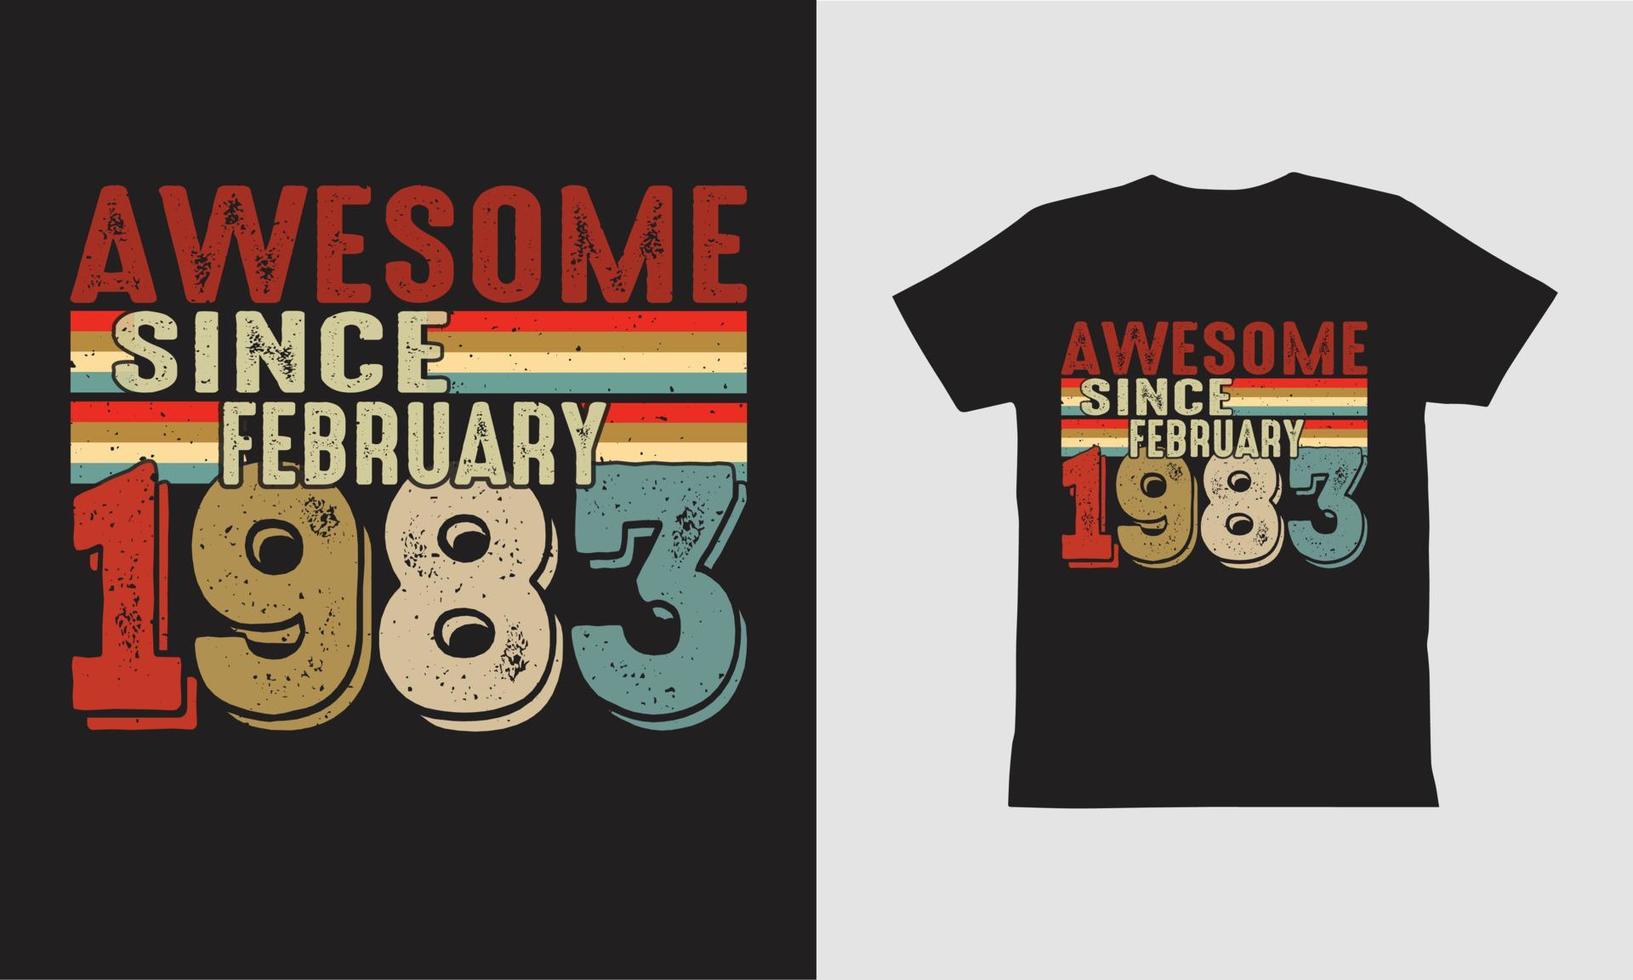 Awesome since February 1983 T shirt Design. vector